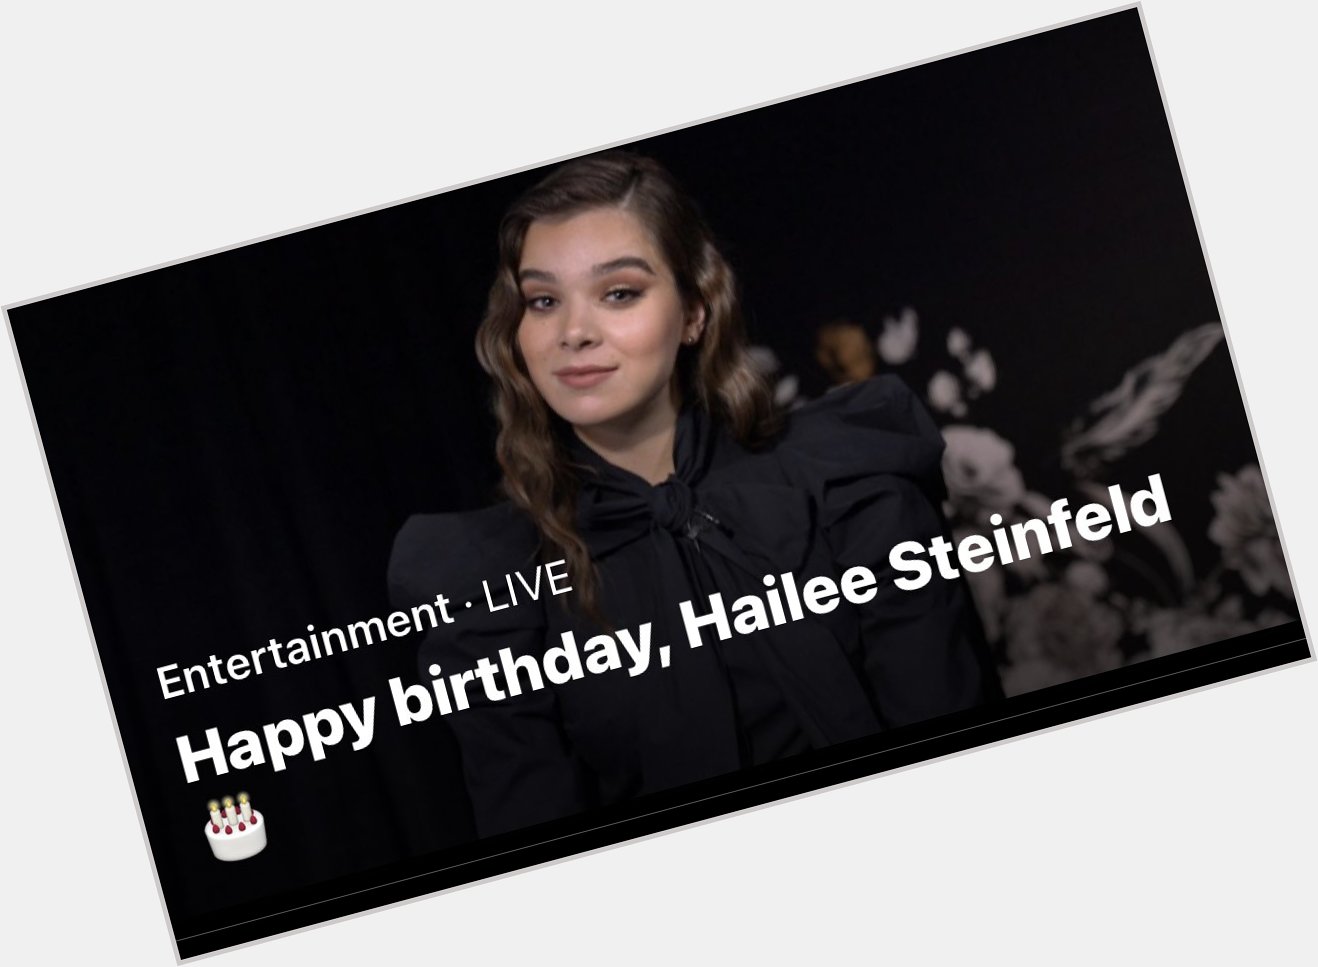 REAL! everyone say happy birthday HAILEE STEINFELD so talented she got an Oscar nom for her first movie 